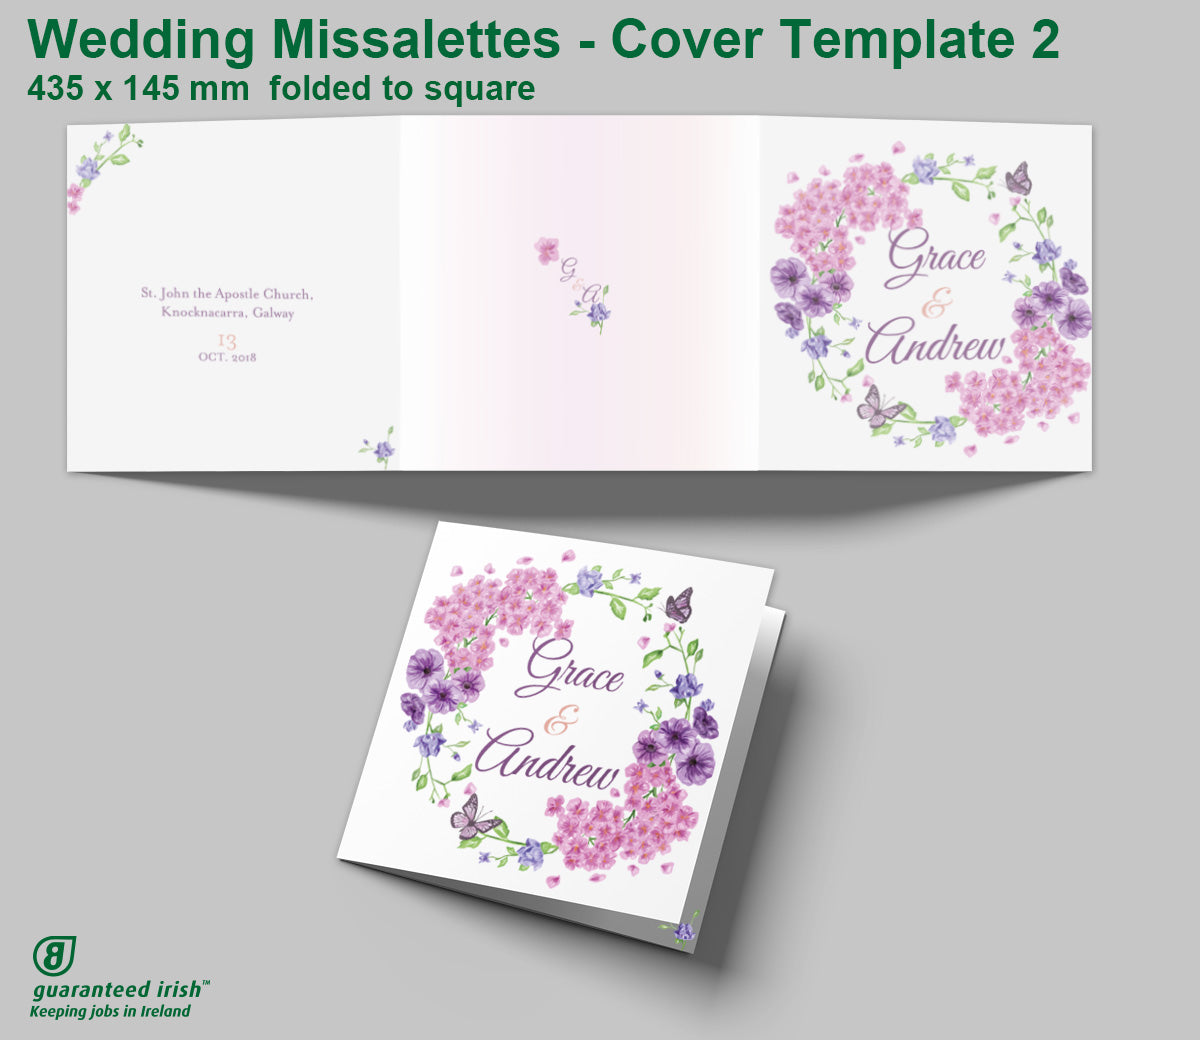 Wedding Missalettes - Cover Template 2